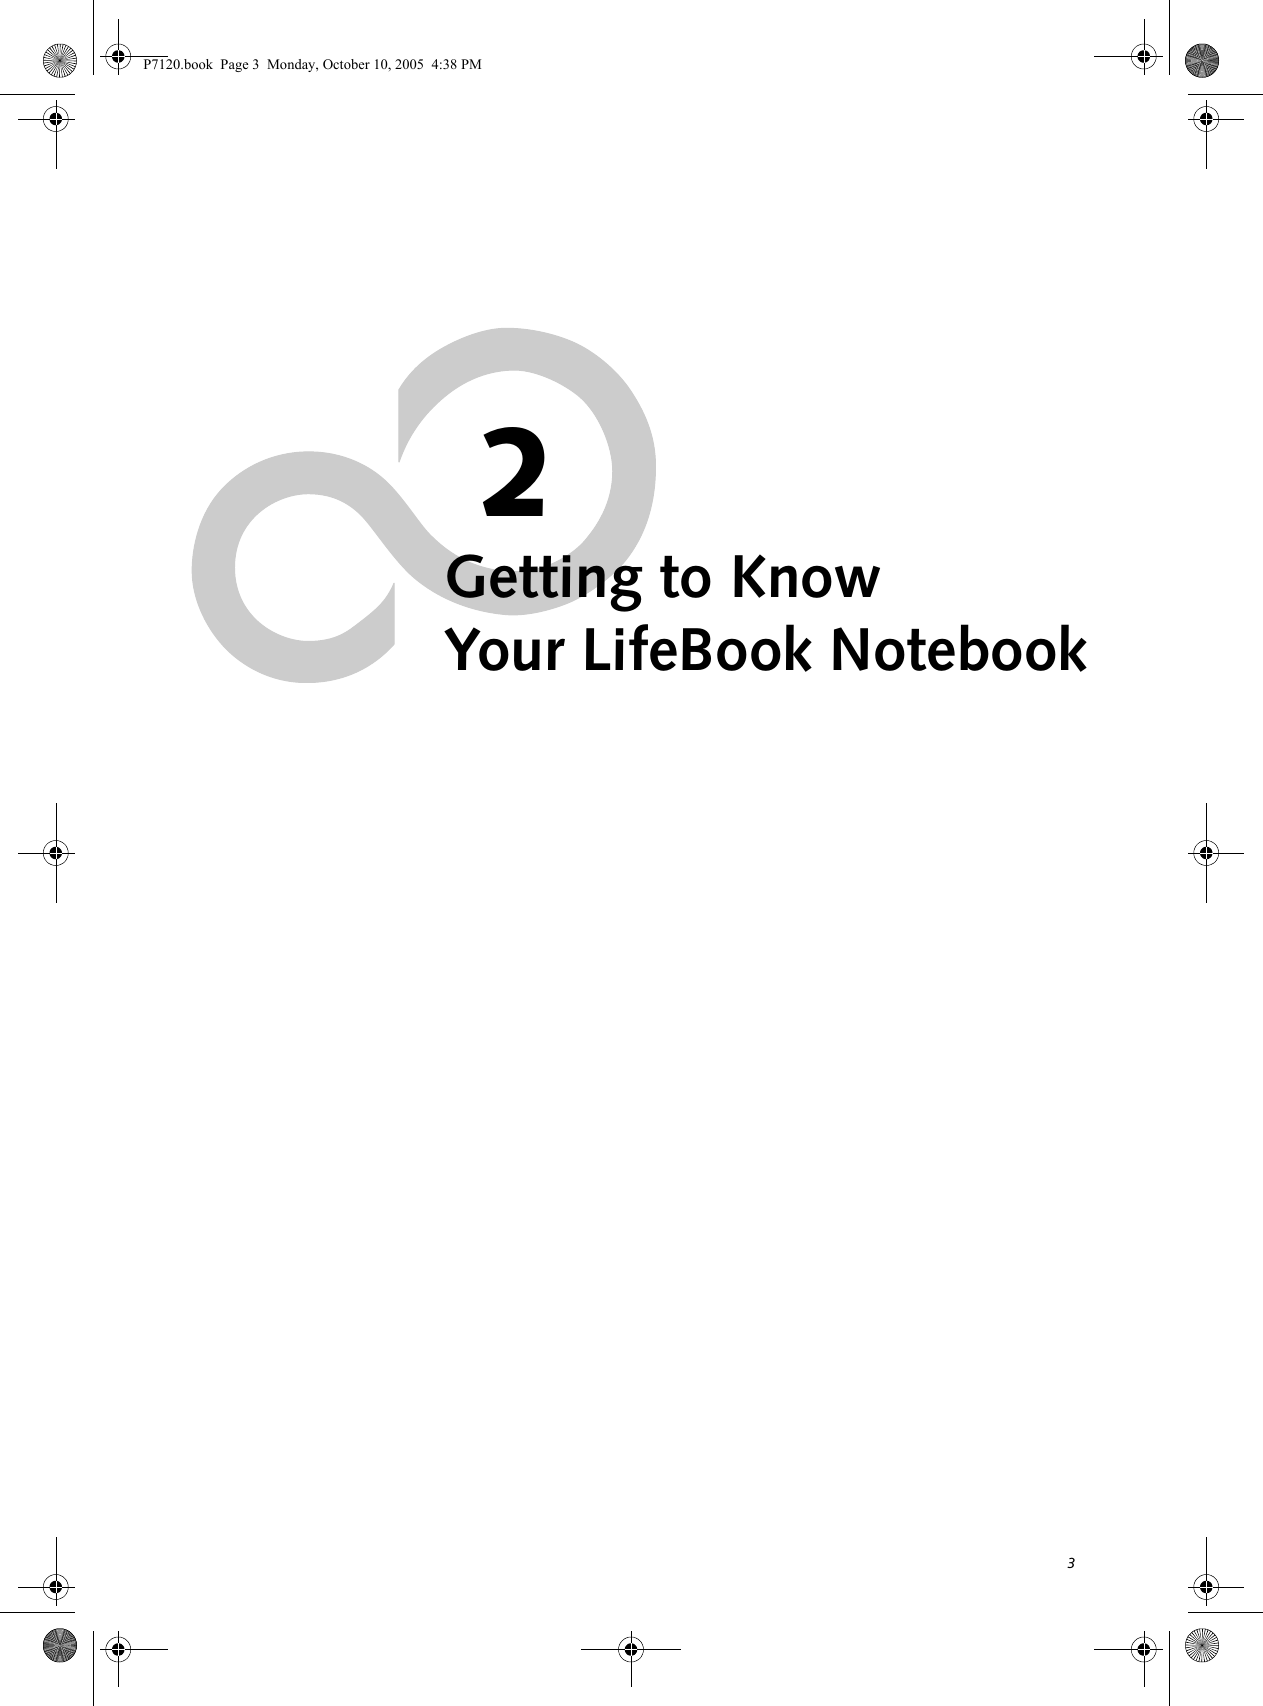 32Getting to KnowYour LifeBook NotebookP7120.book  Page 3  Monday, October 10, 2005  4:38 PM